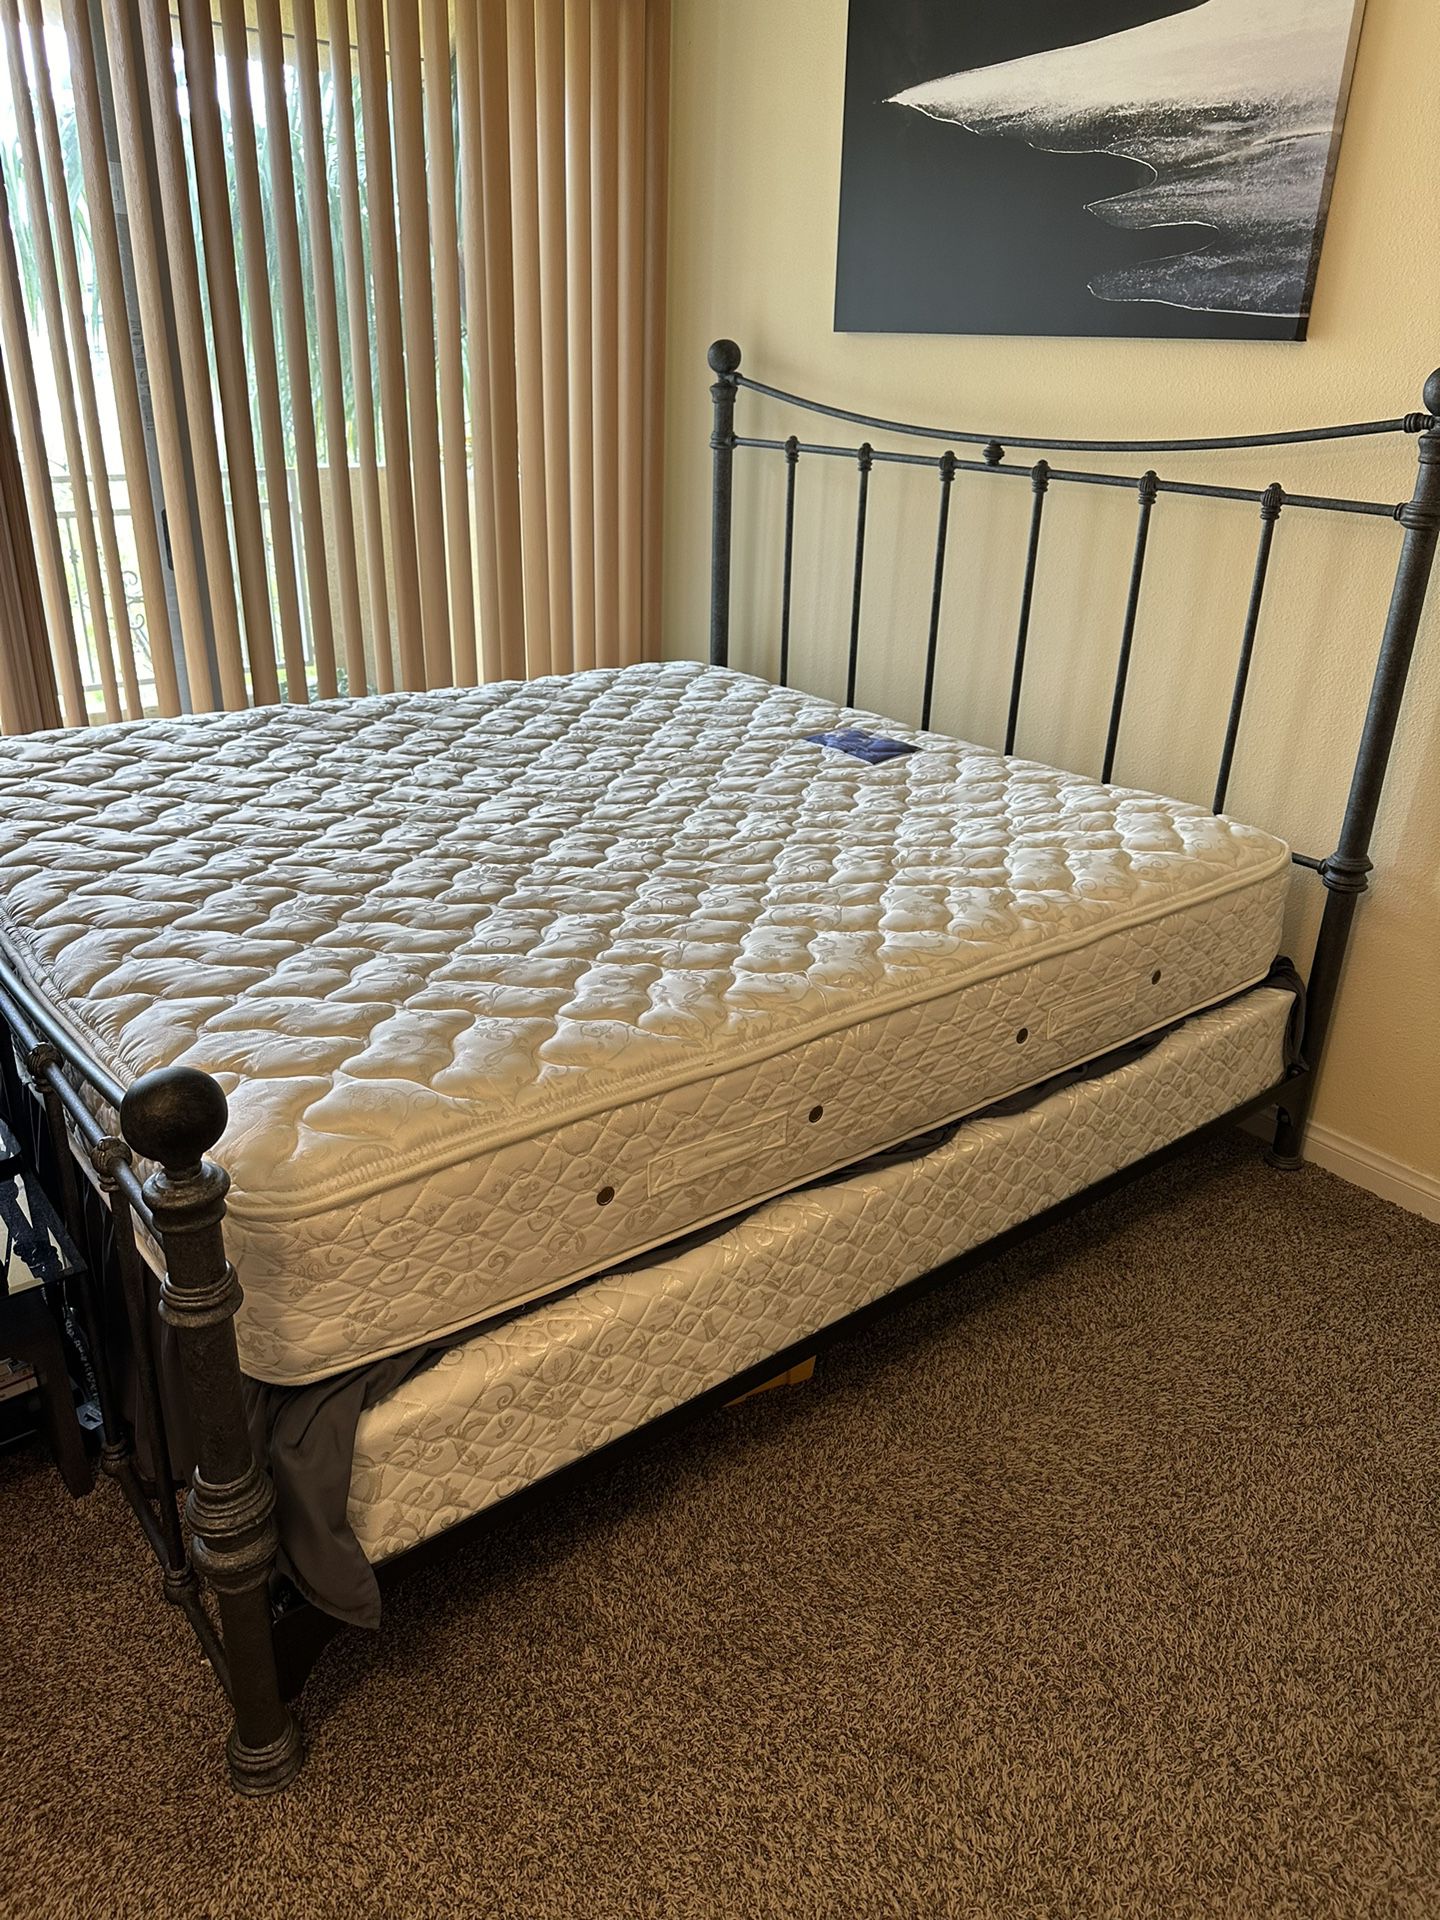 Free King Bed Frame And Box Spring W/ Mattress